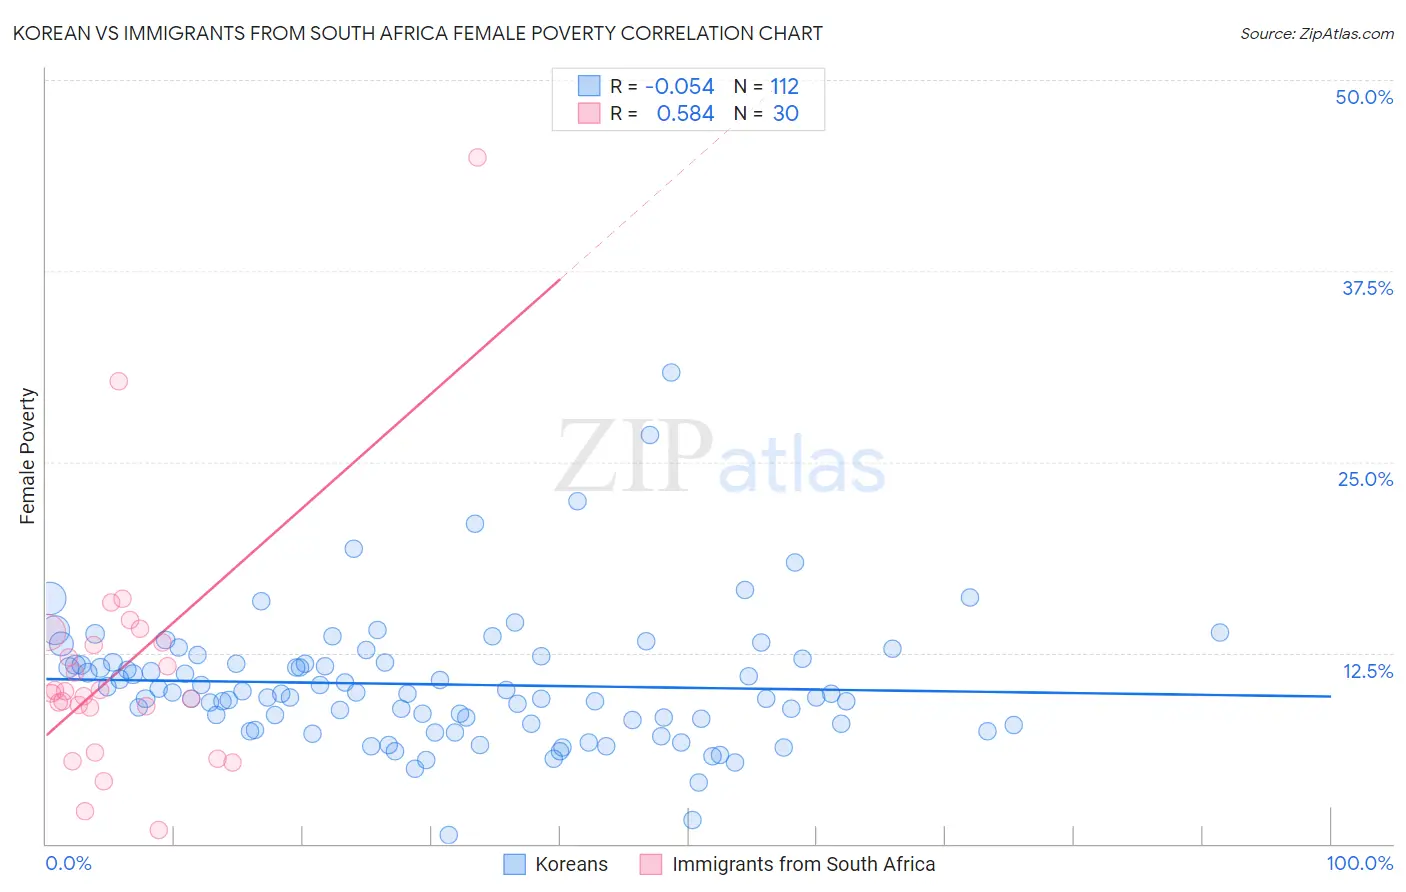 Korean vs Immigrants from South Africa Female Poverty